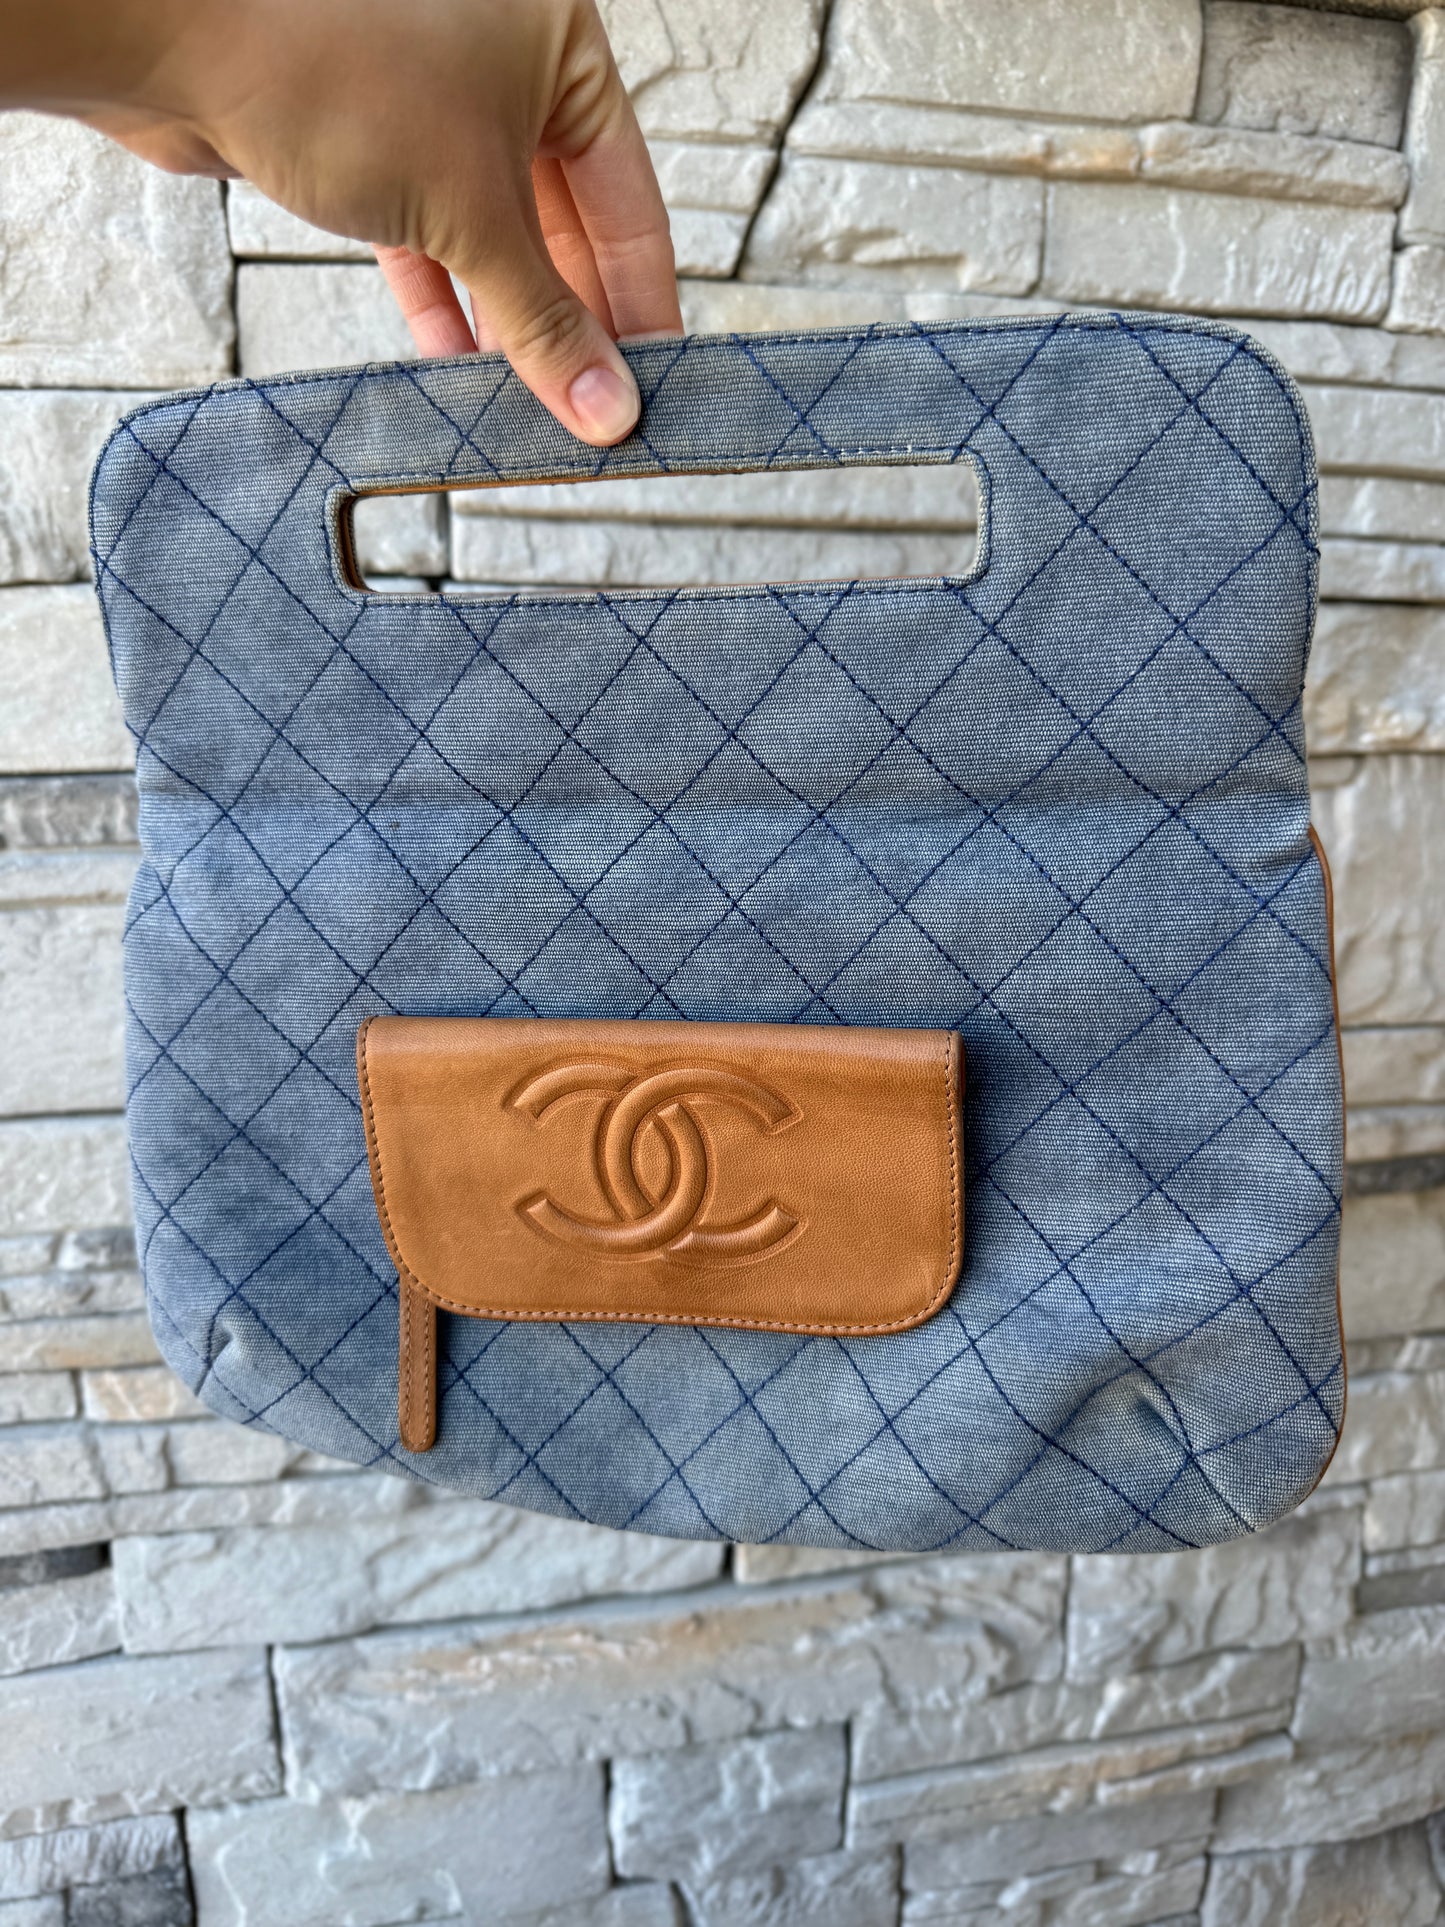 Chanel Denim and Leather 2 Way Clutch